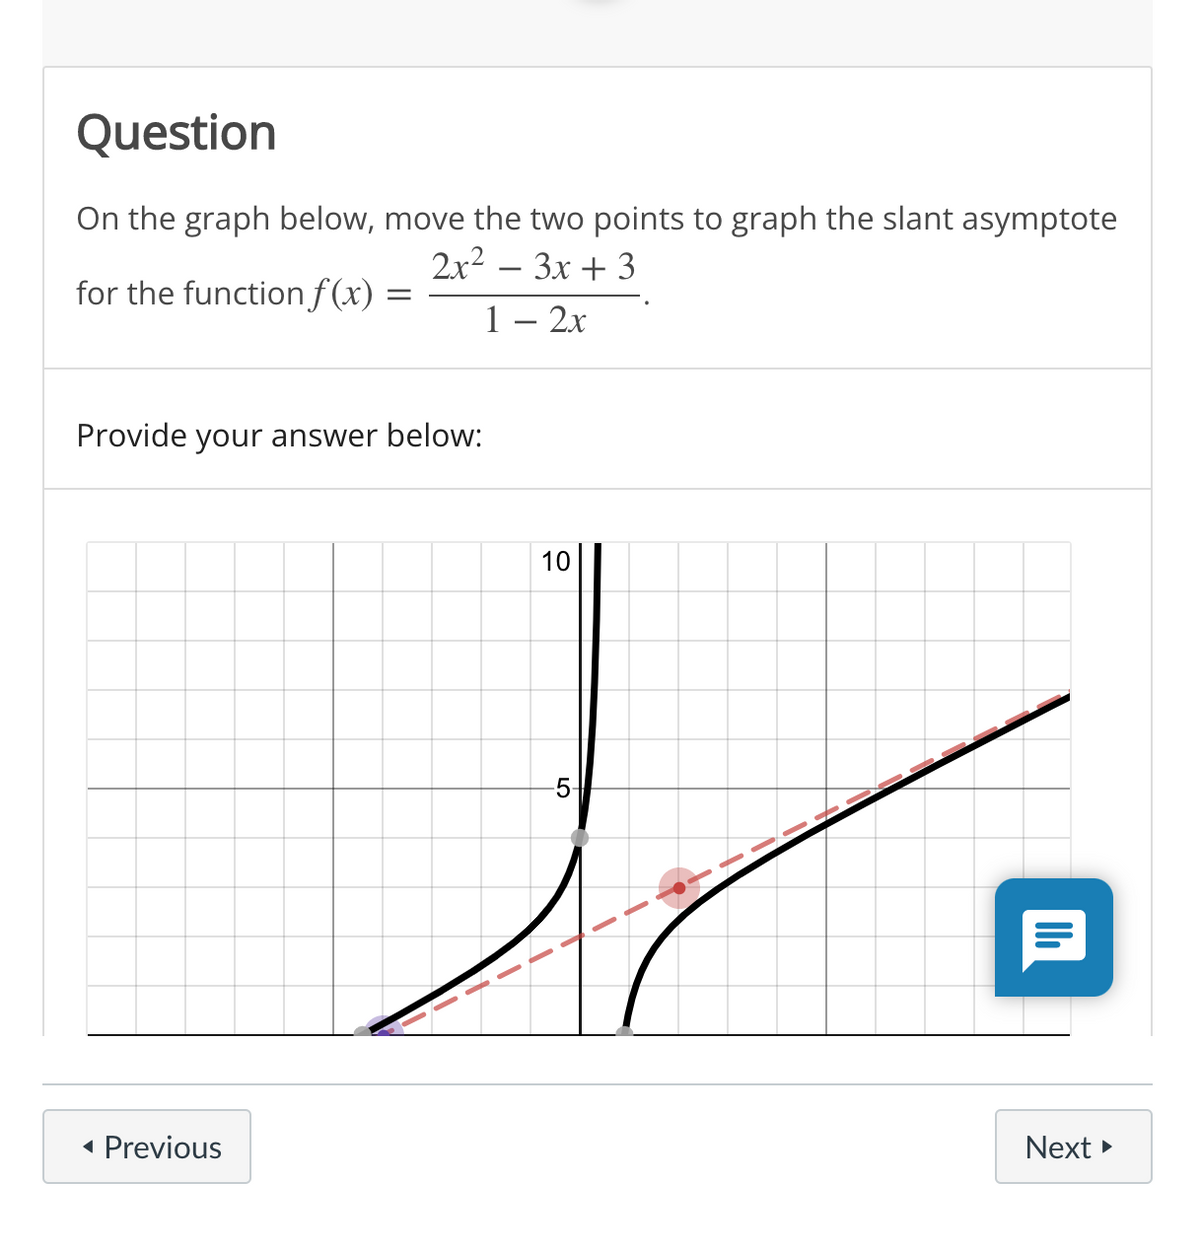 Question
On the graph below, move the two points to graph the slant asymptote
2x2 – 3x + 3
for the function f(x)
1 – 2x
Provide your answer below:
10
-5-
• Previous
Next
